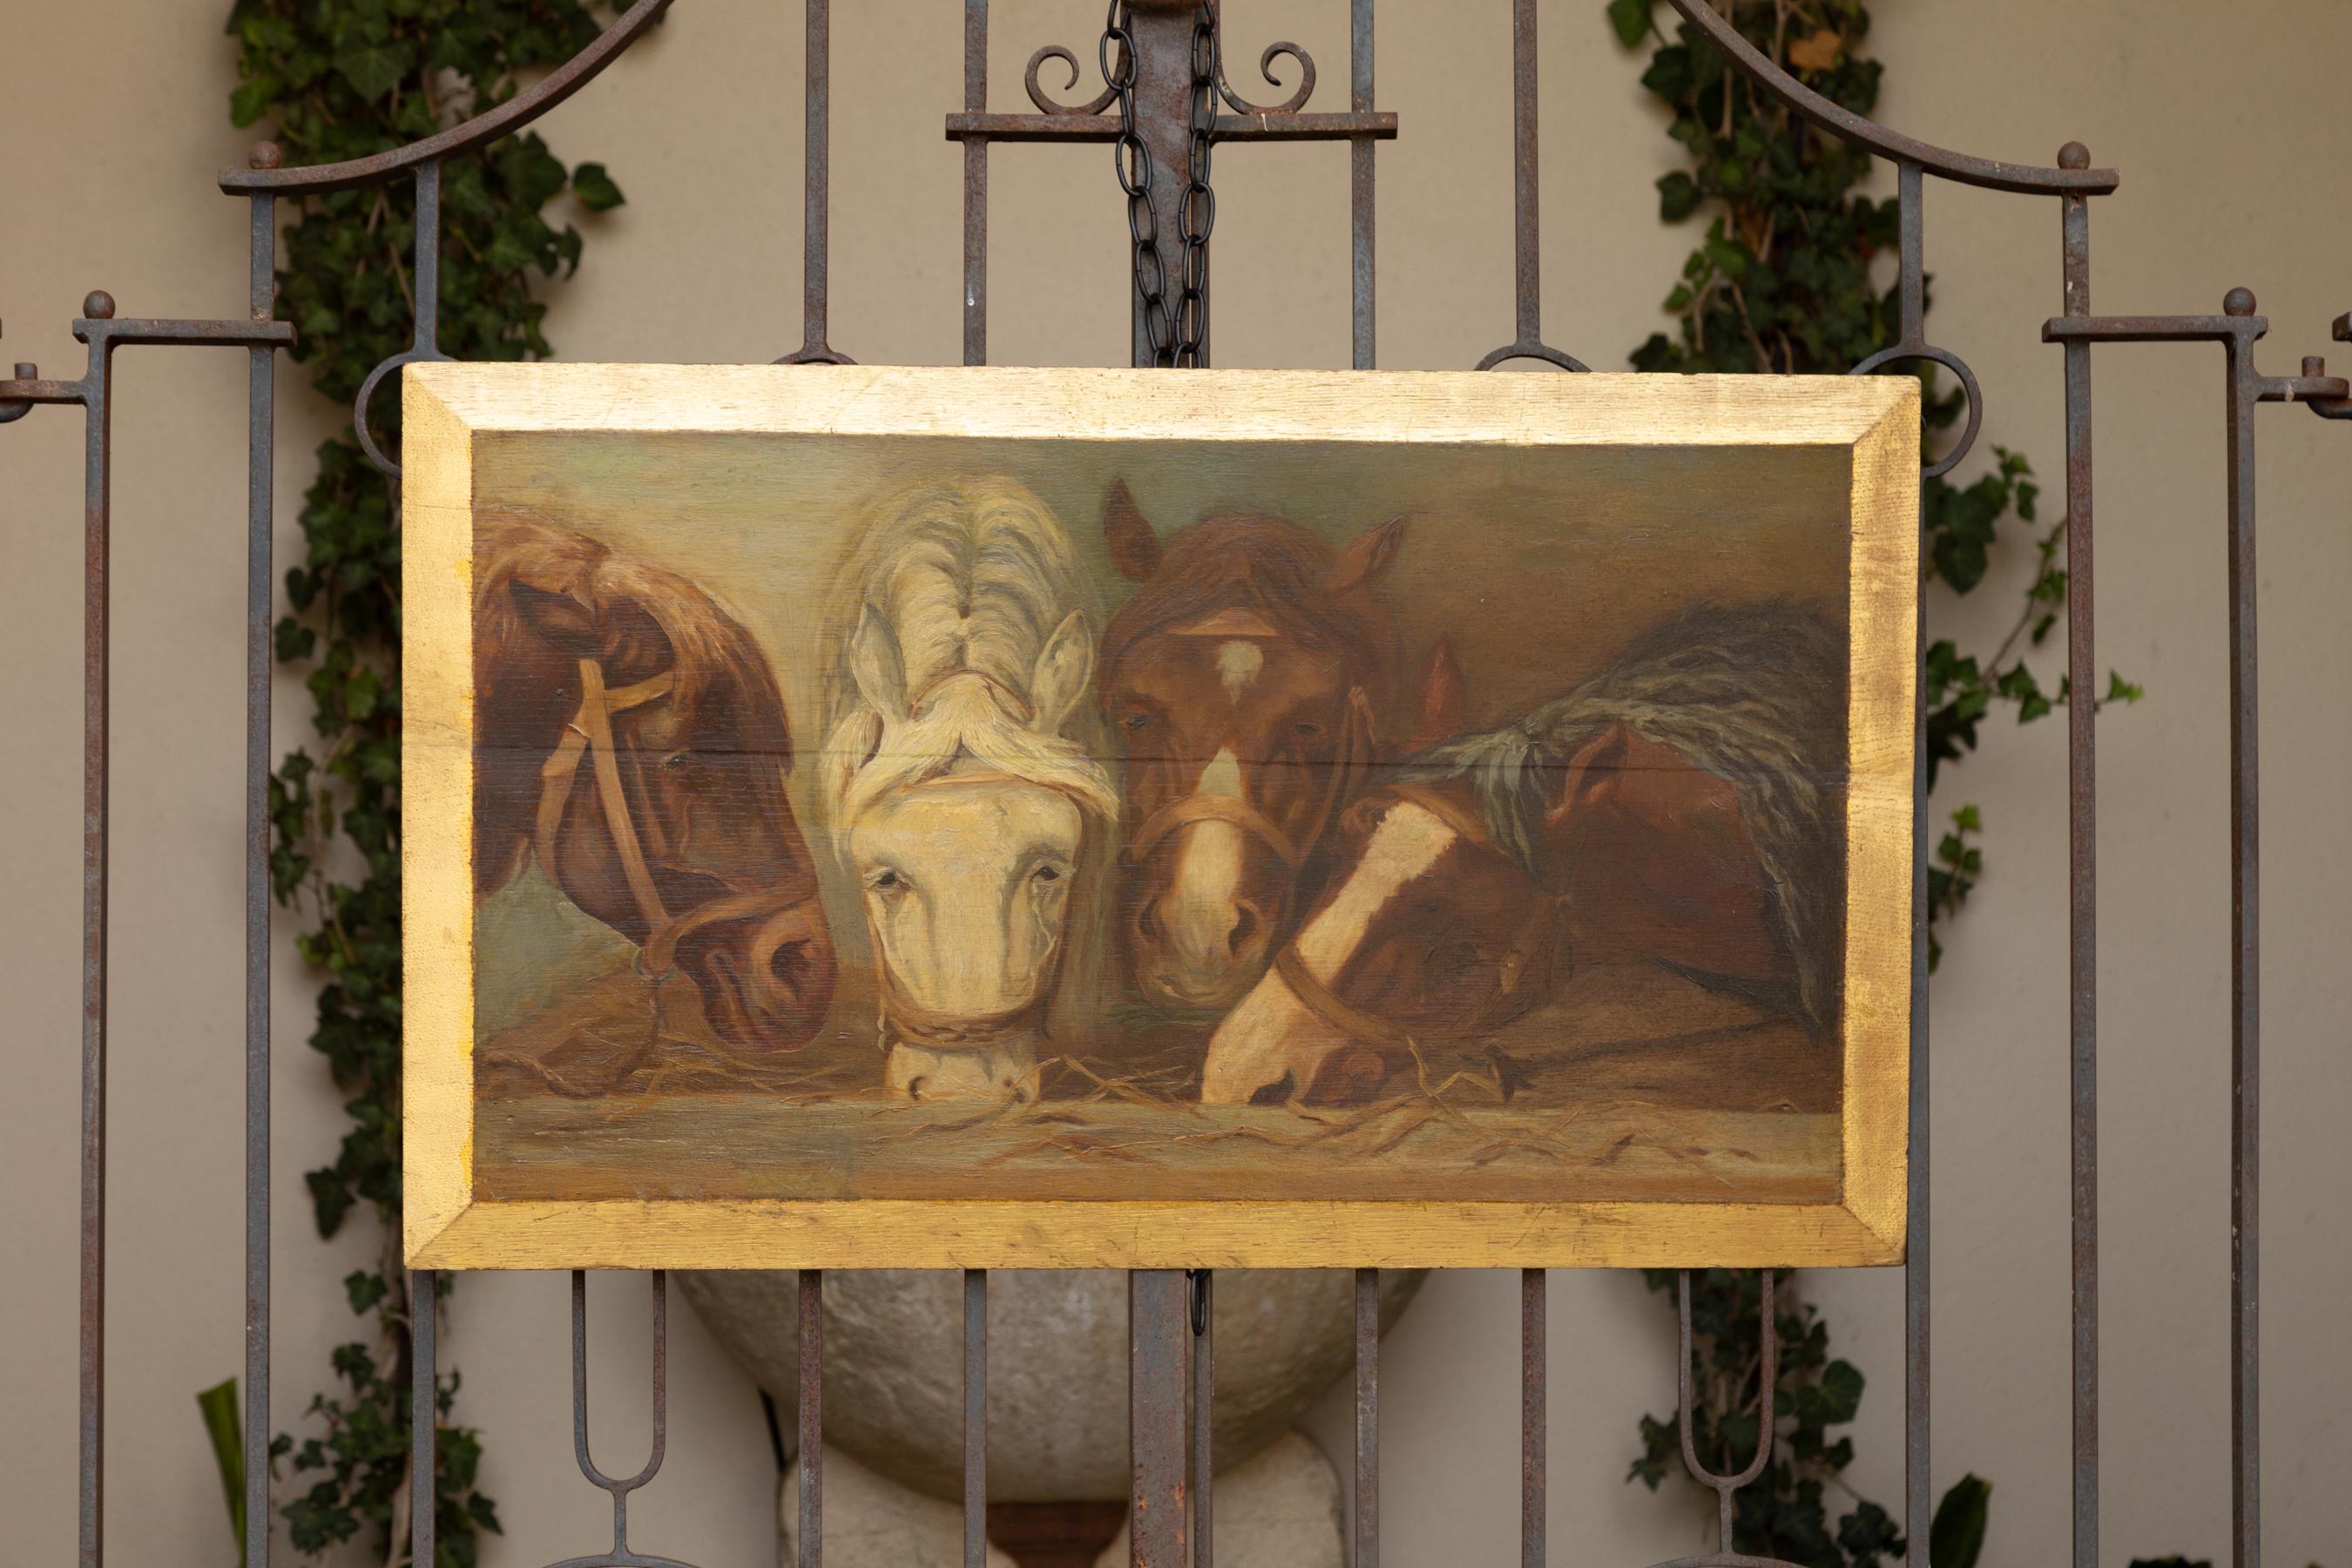 An English oil on board horse painting from the early 20th century, with gilt painted border. Born in England during the early years of the 20th century, this horizontal painting attracts our attention with its four horses depicted in a close view